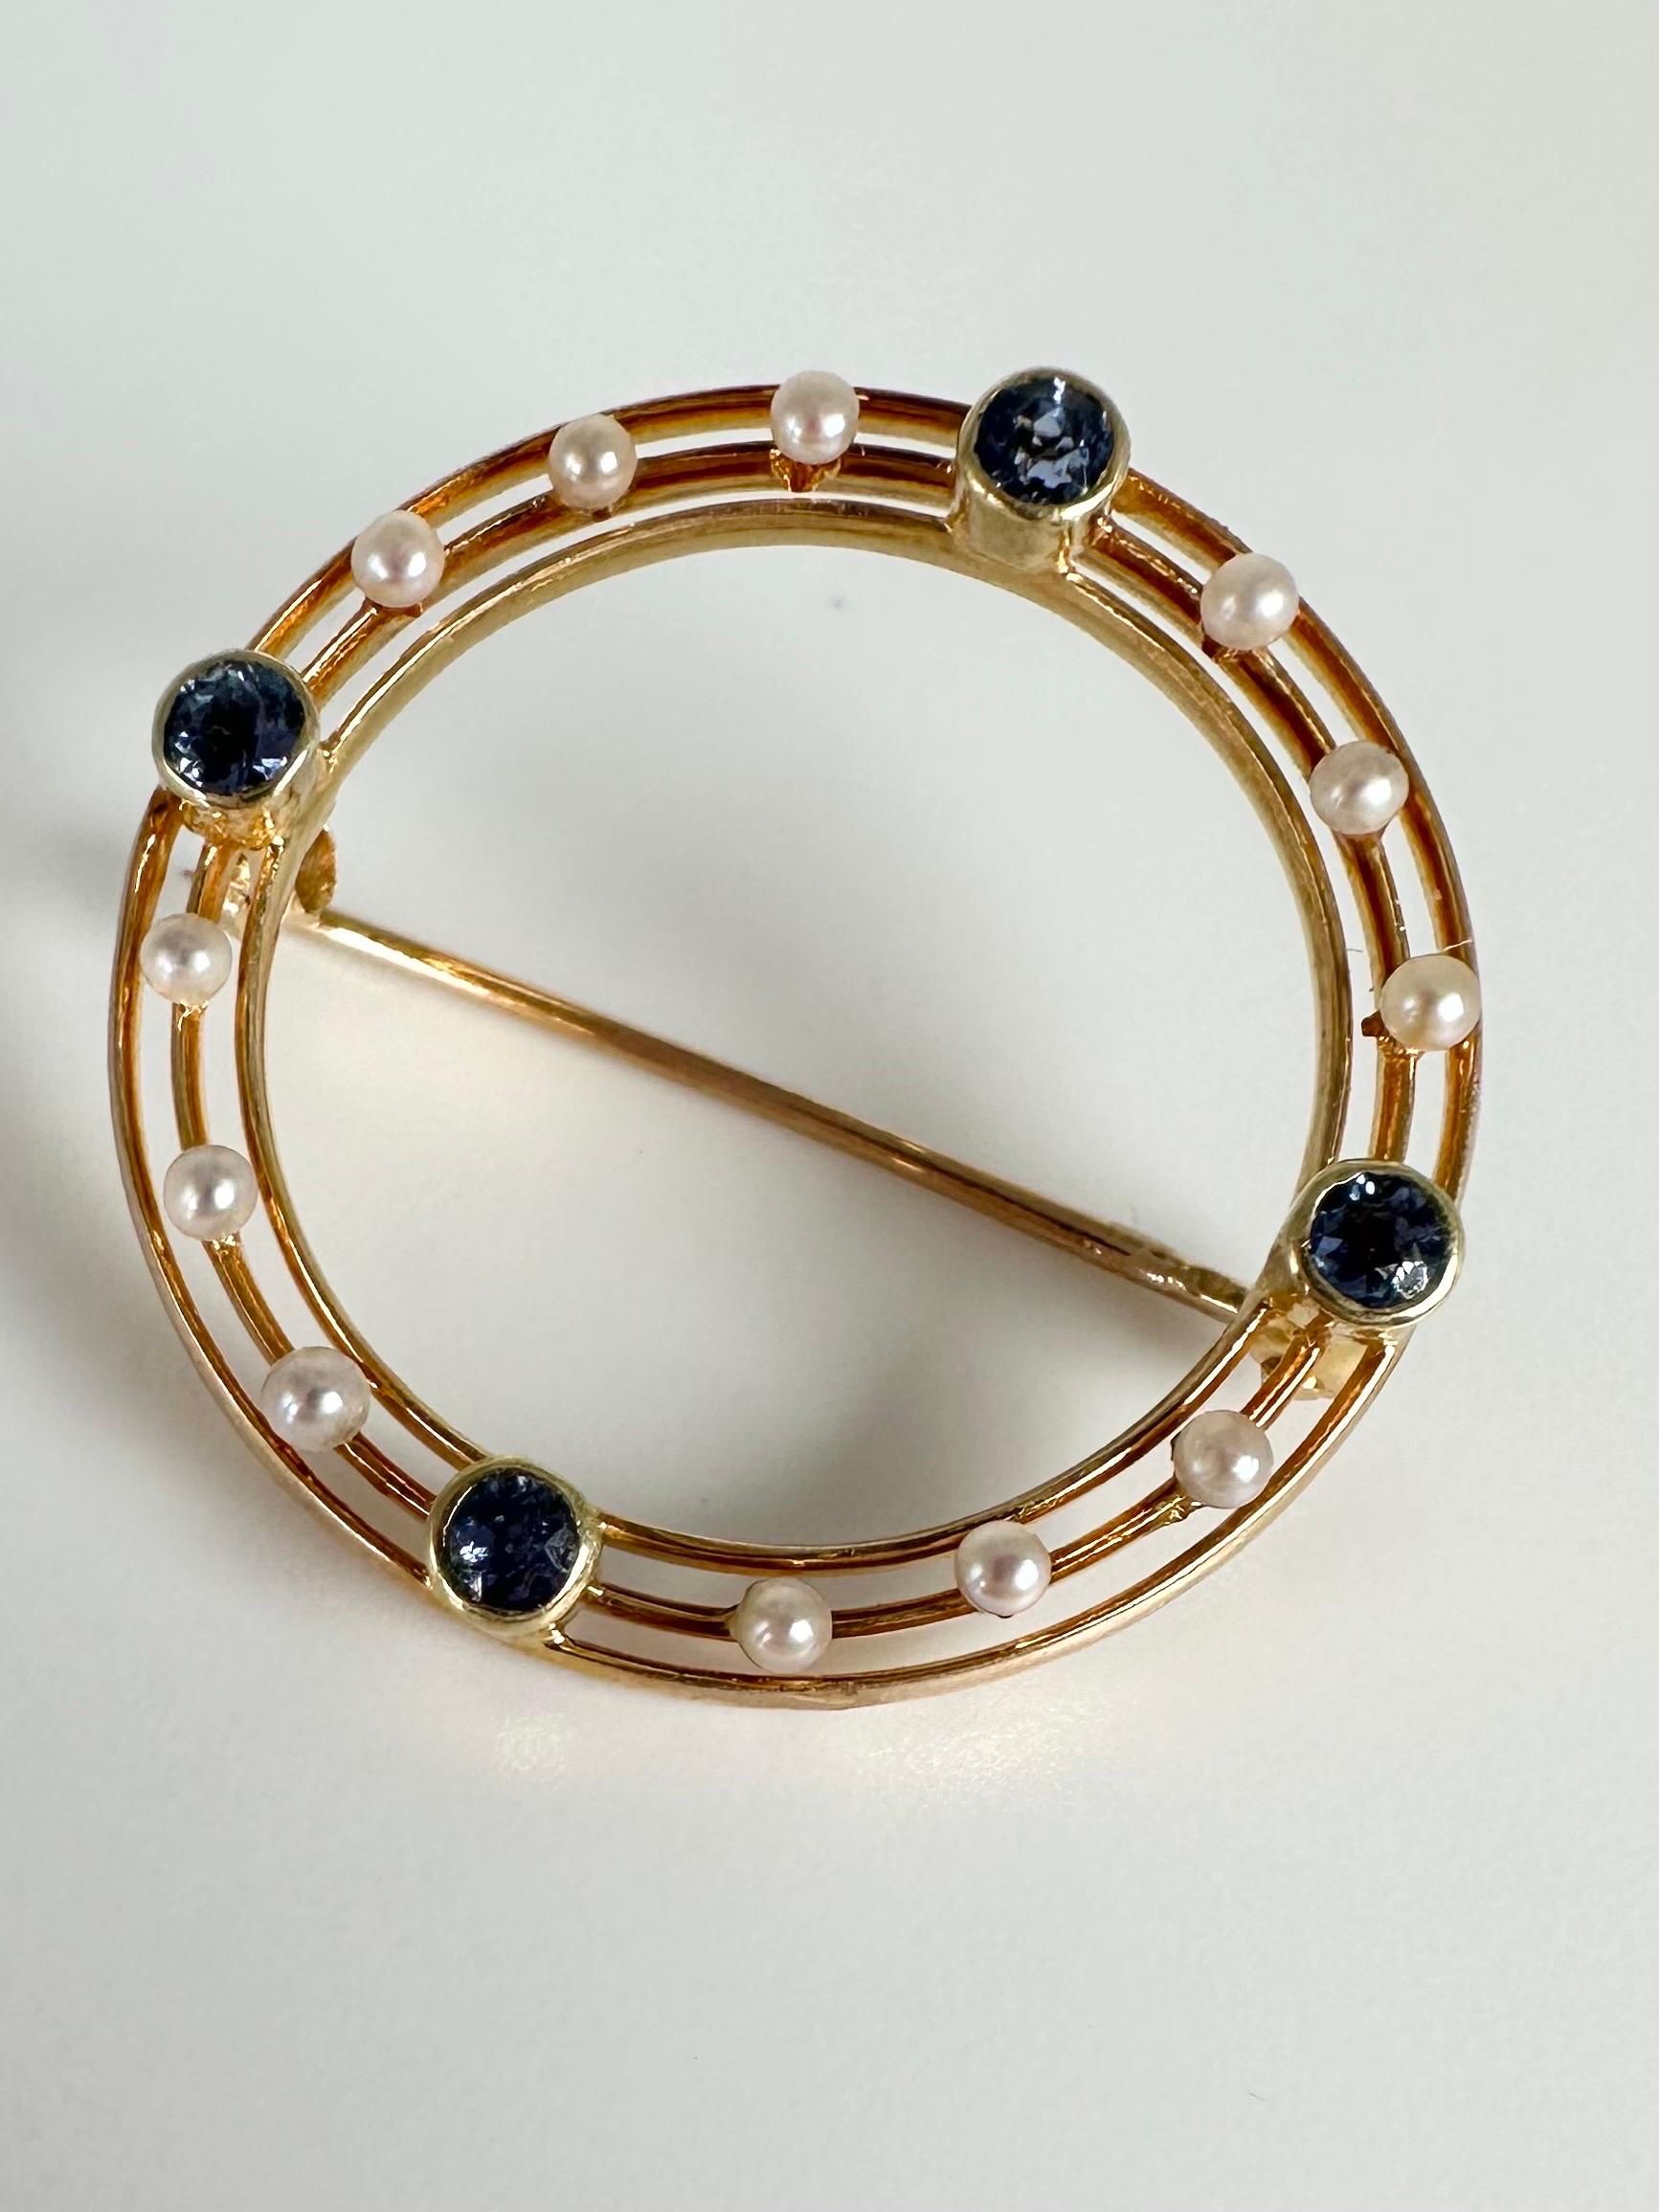 Sapphire & Pearl brooch pin in 14KT yellow gold, Edwardian, very intricate but well made. The pearls are seed pearls, 12 in total.

METAL: 14KT yellow gold
NATURAL SAPPHIRE(S)
Clarity/Color: Blue, Slightly Inluded
Cut:Round
Grams:2.46
Item18000019